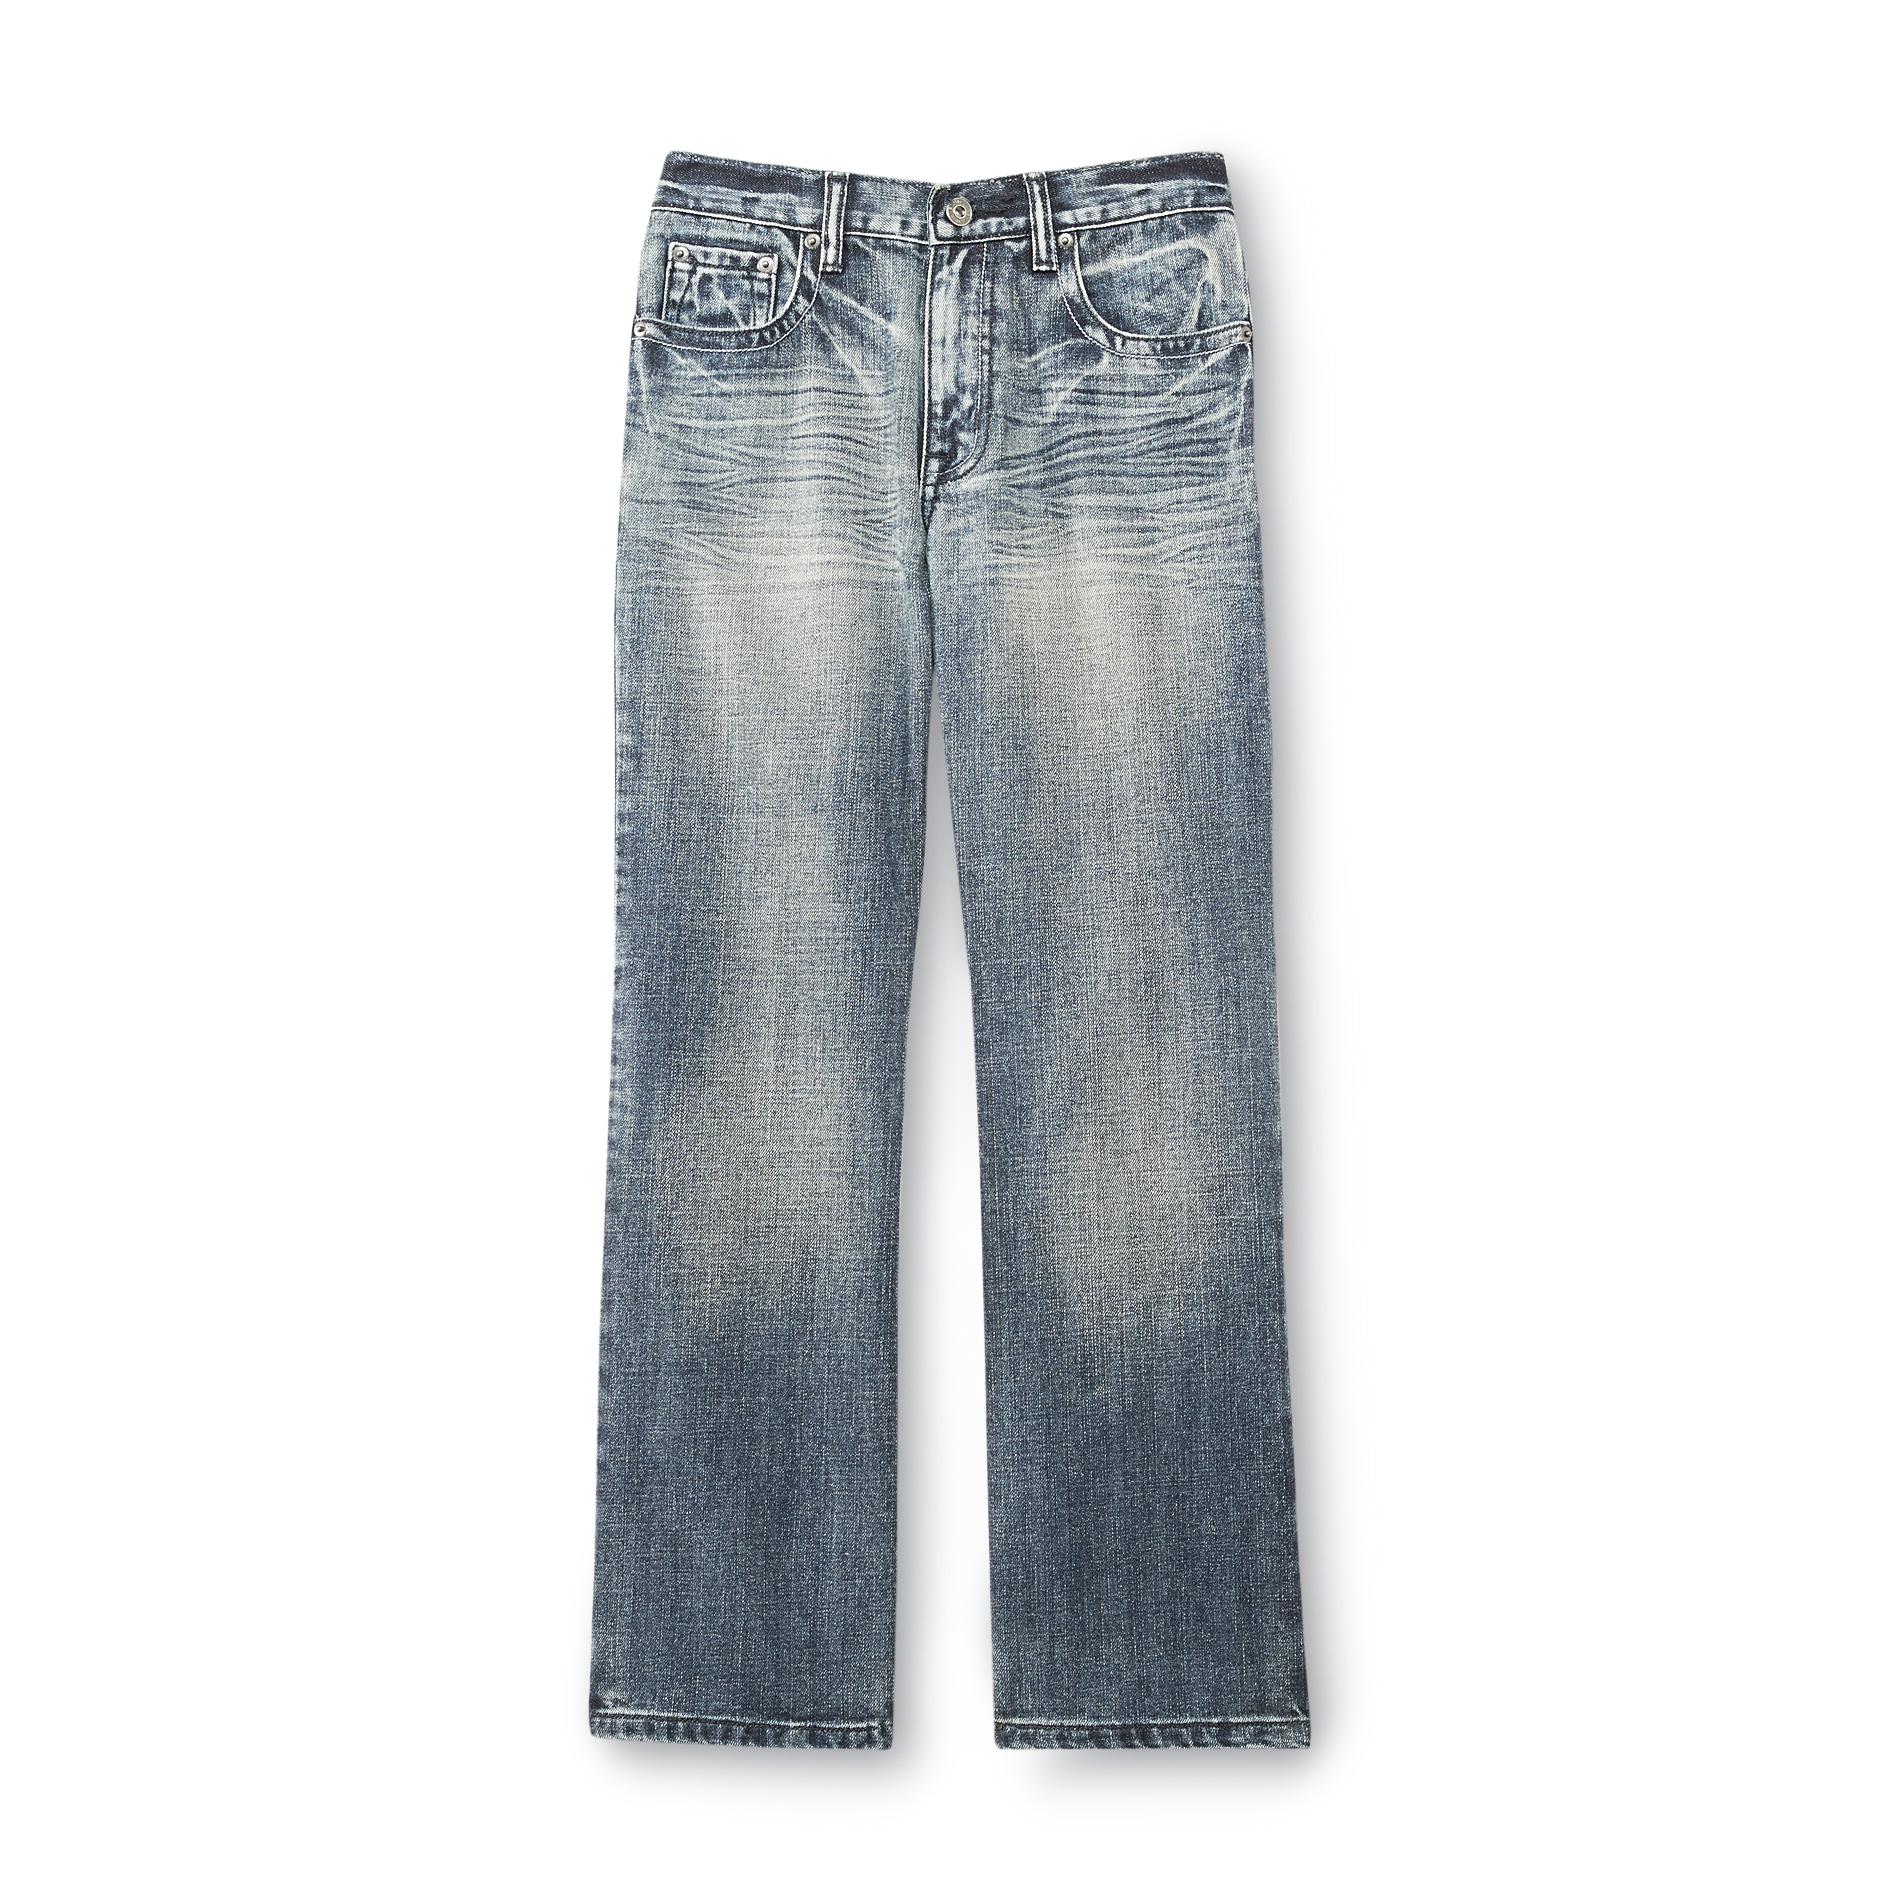 Route 66 Girl's Bootcut Denim Jeans - Light Wash